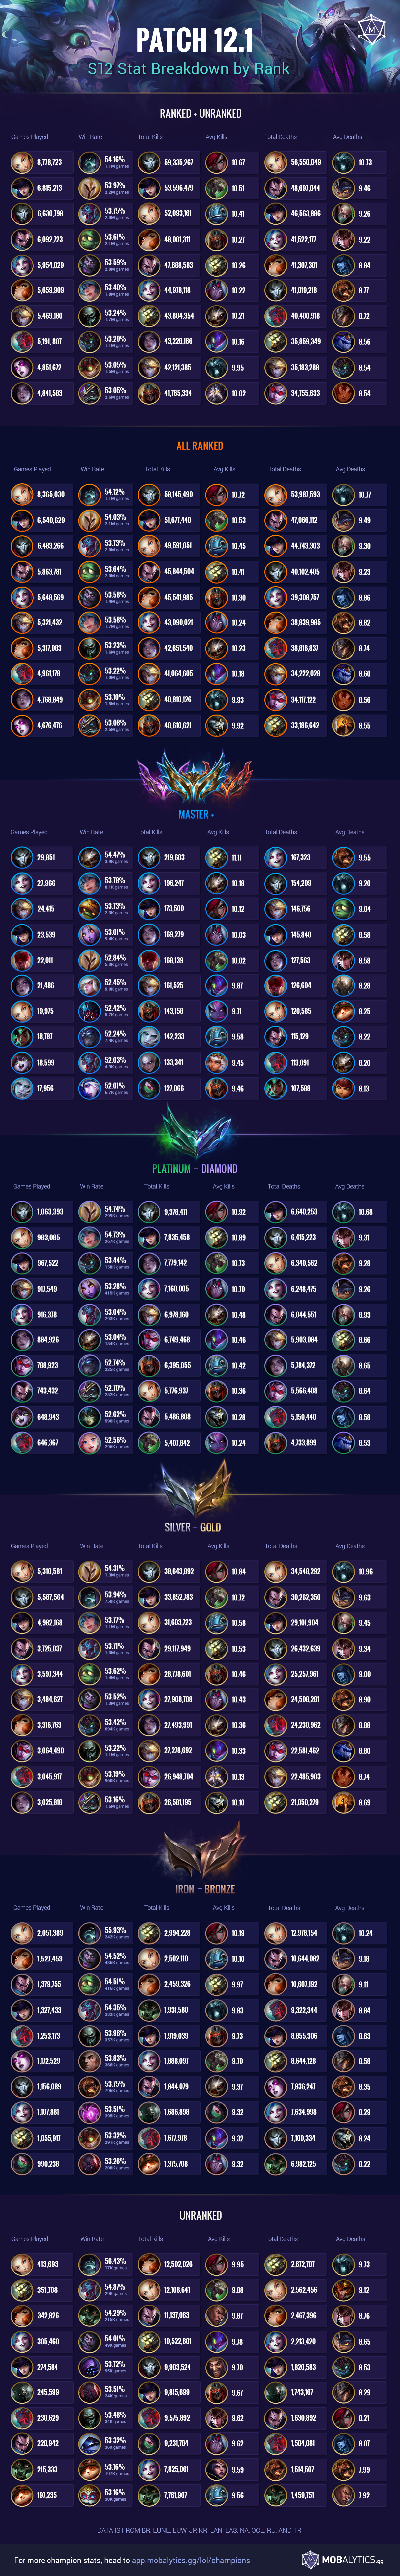 Patch 12.1 Rewind: Top 10 Champ Stats by Rank (Kills, Win Rate, Deaths, and More)